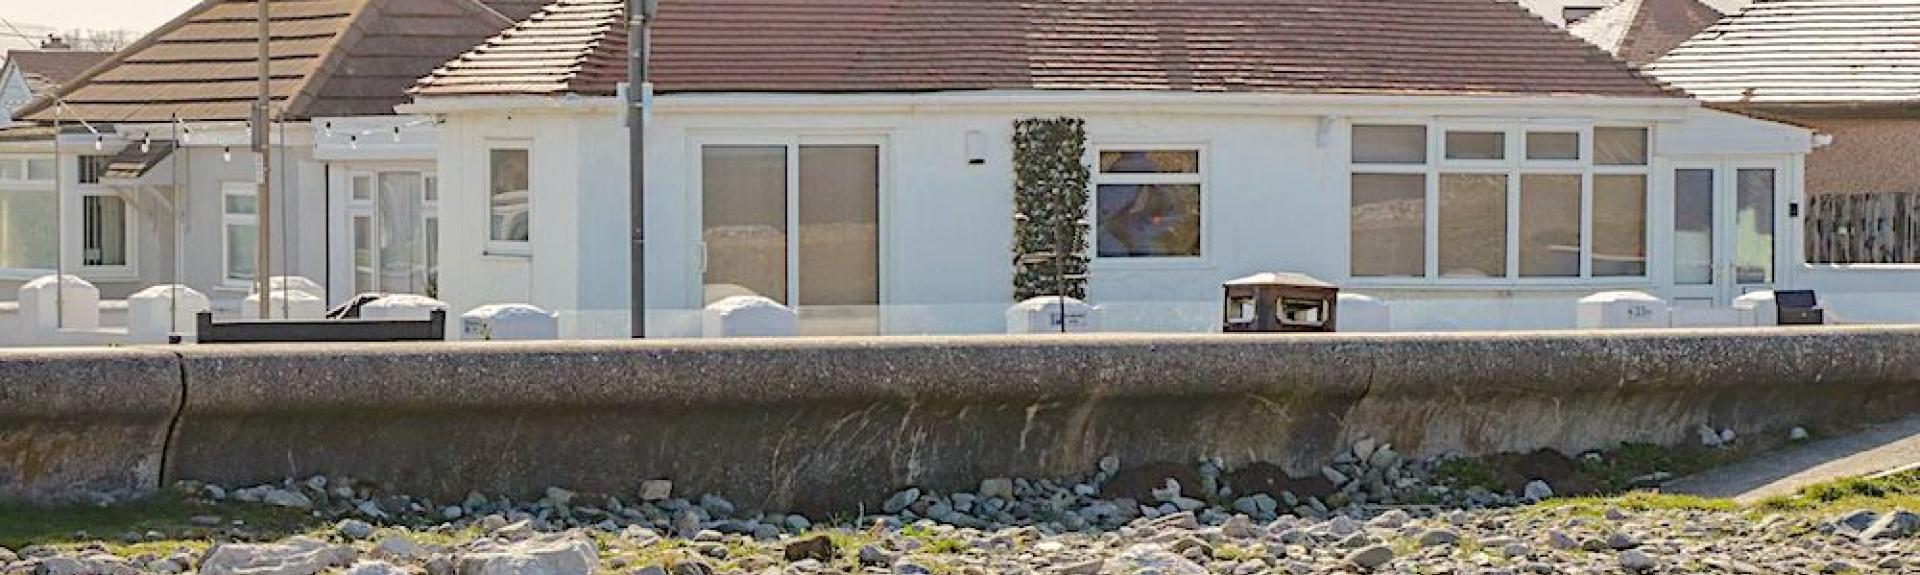 Exteerio of a beachfront chalet bungalow overlooking a sea wall.